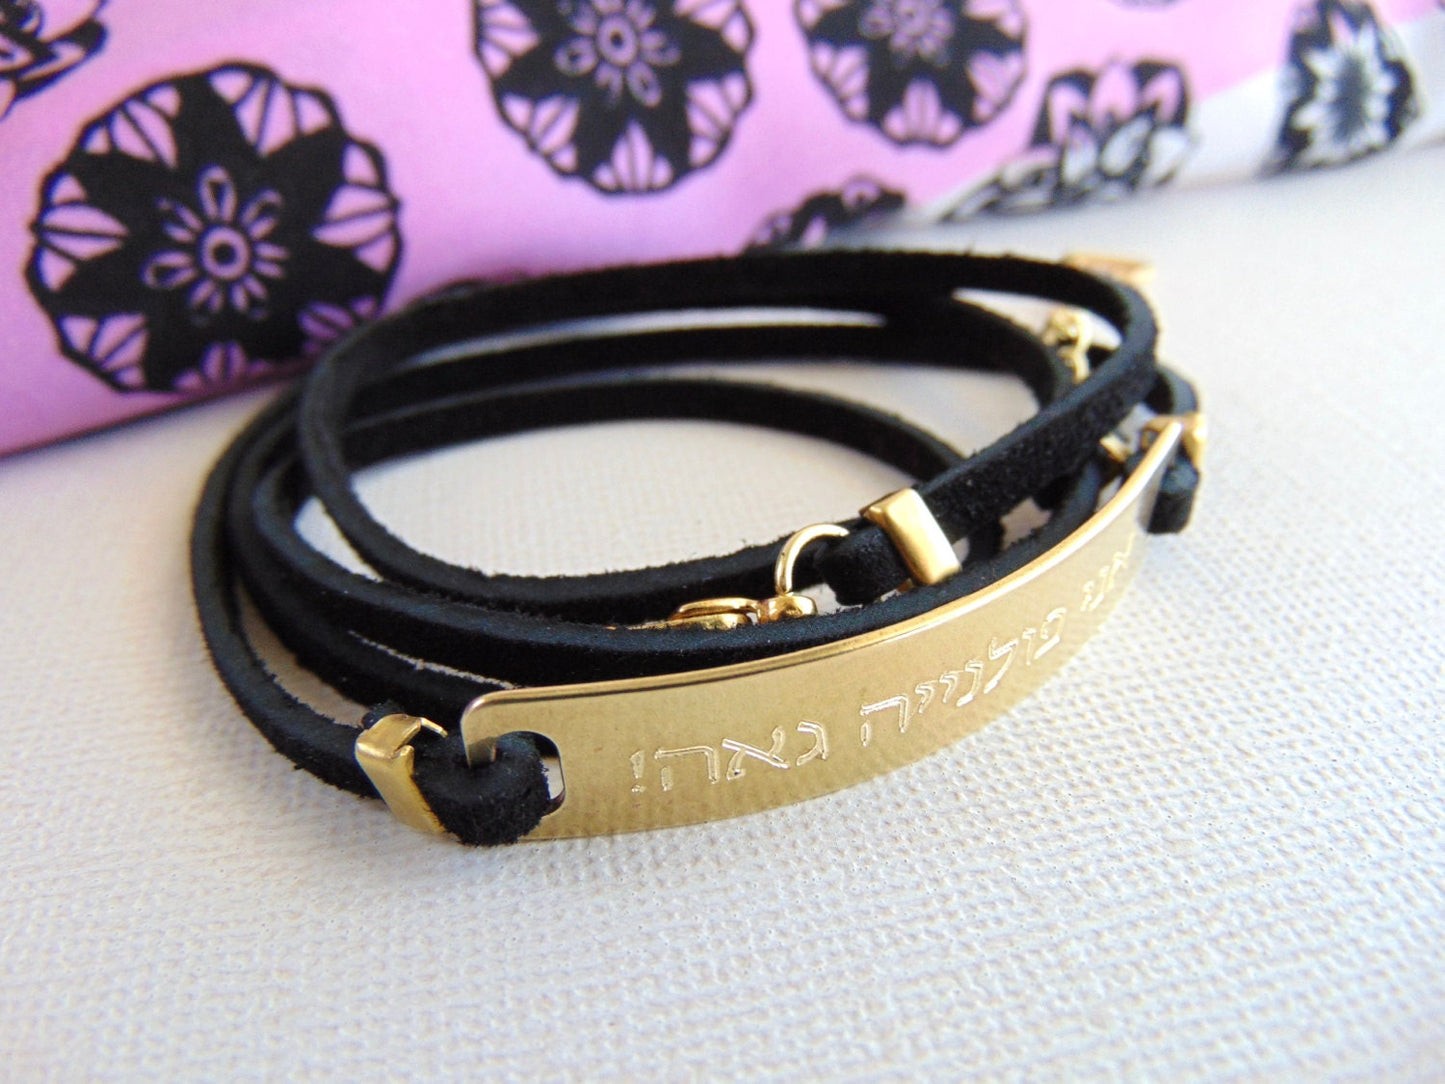 Hebrew Quote engraved on wrap leather Bracelet